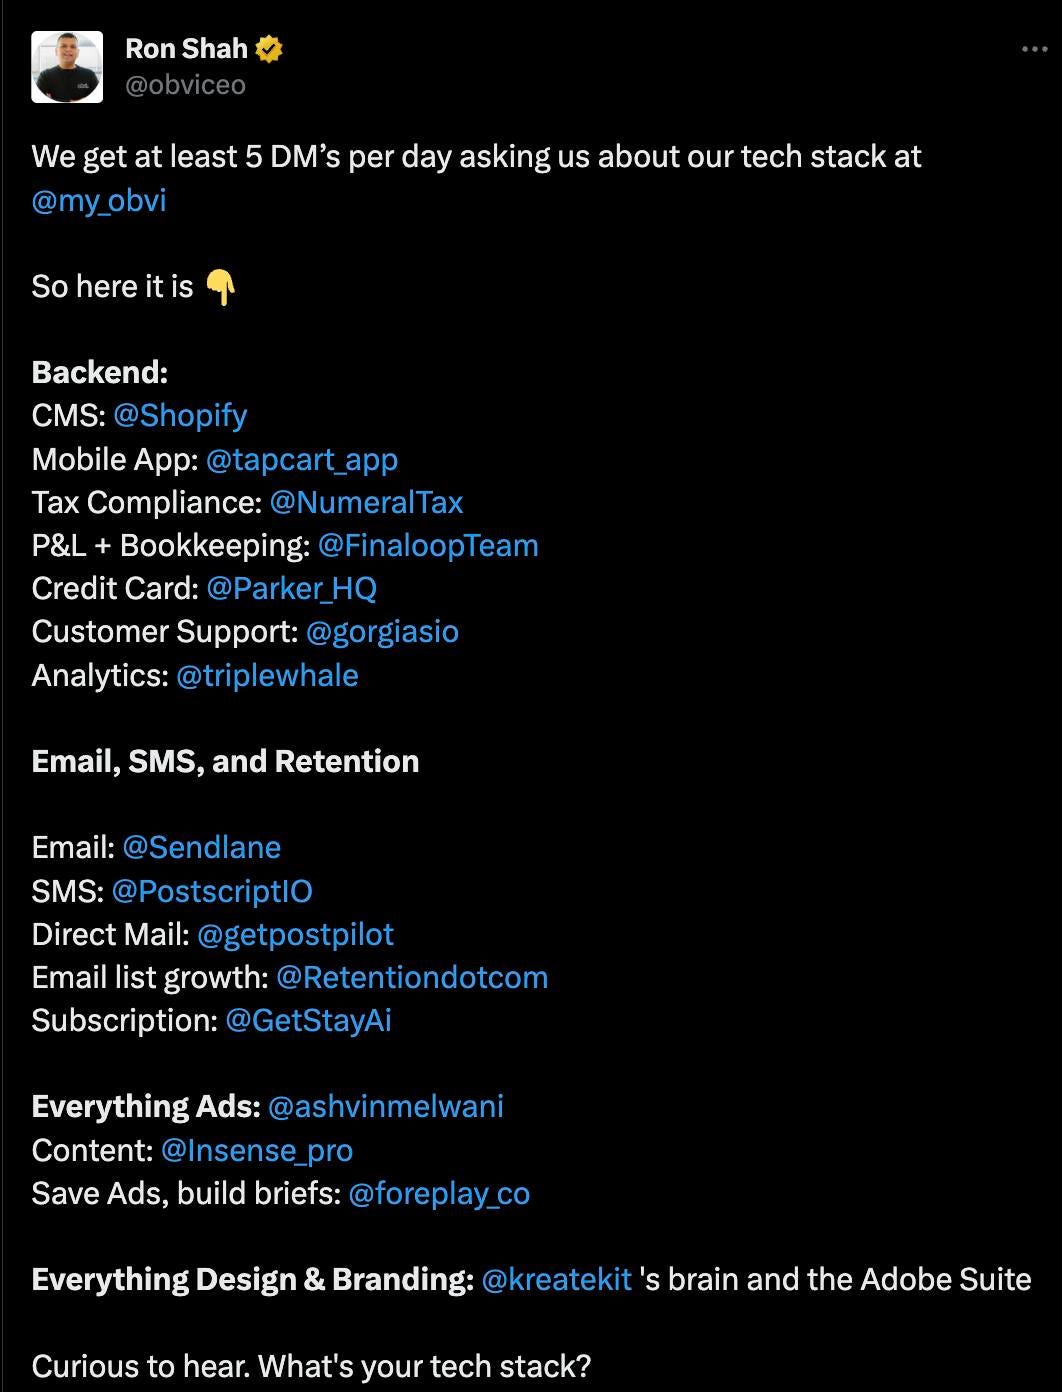 May be an image of text that says "Ron Shah We get at least 5 DM's per day asking us about our tech stack at @my_obvi obvi So here is Backend: CMS: @Shopify Mobile App: @tapcart_app Tax Compliance: @NumeralTax P&L Bookkeeping: @FinaloopTeam Credit Card: @Parker_H Customer Support: @gorgiasio Analytics: @triplewhale Email, SMS, and Retention Email: @Sendlane SMS: @PostscriptIO Direct Mail: @getpostpilot Email list growth: @Retentiondotcom Subscription: @GetStayAi Everything Ads: :@ashvinmelwani Content: @Insense_ Save Ads, build briefs: @foreplay Everything Design & Branding: @kreatekit 's brain and the Adobe Suite Curious to hear. What's your tech stack?"